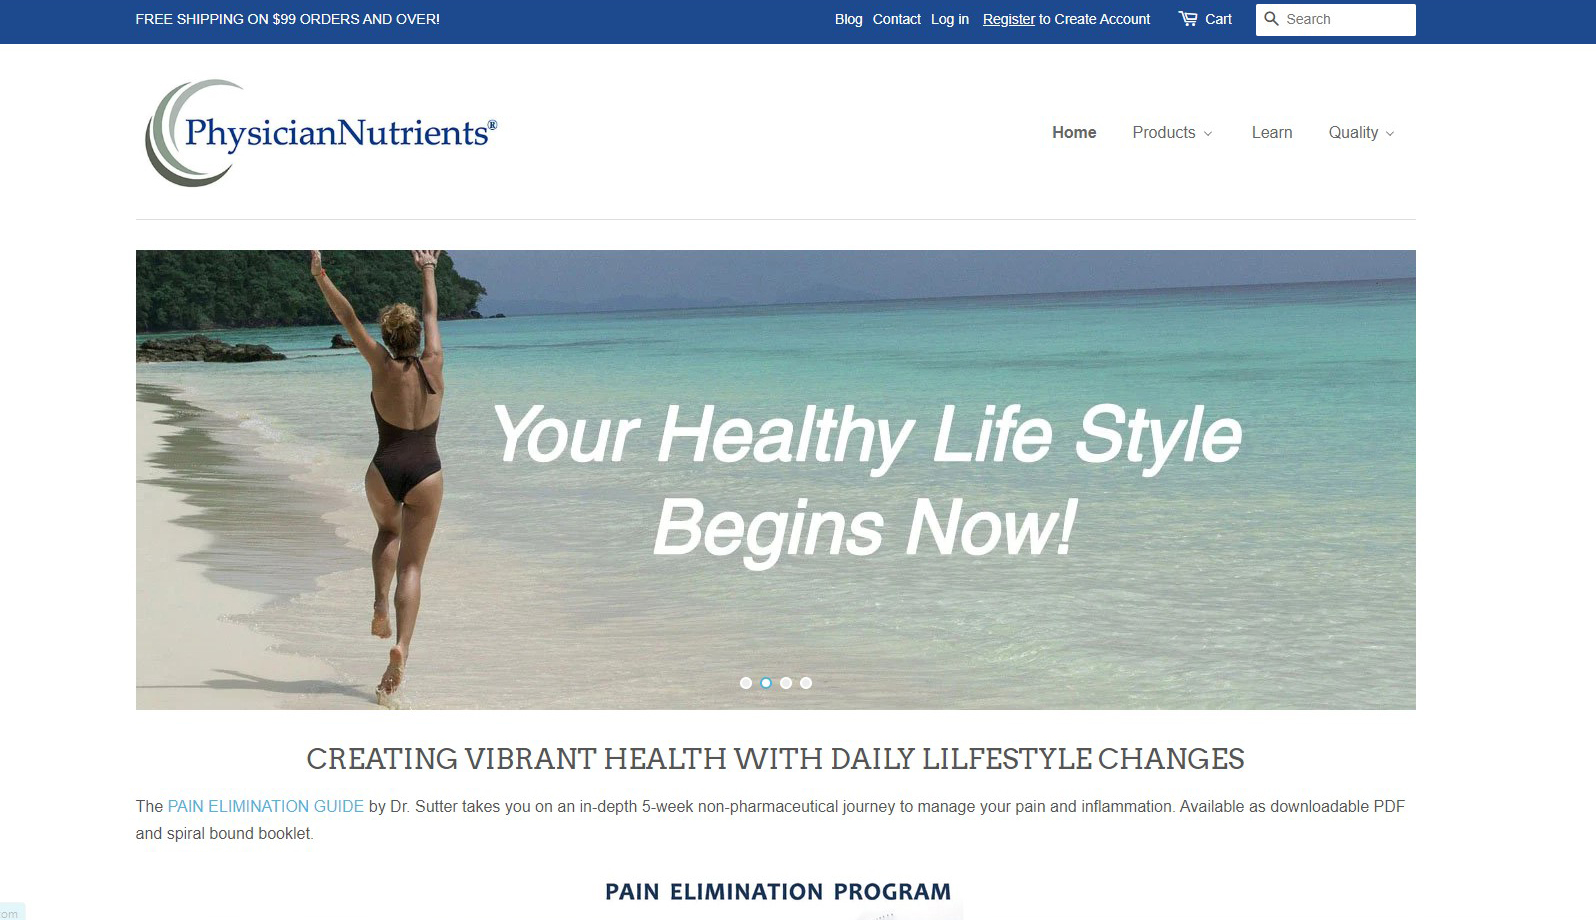 physiciannutrients.com - Pharmaceutical Grade Supplements for Health and Wellness